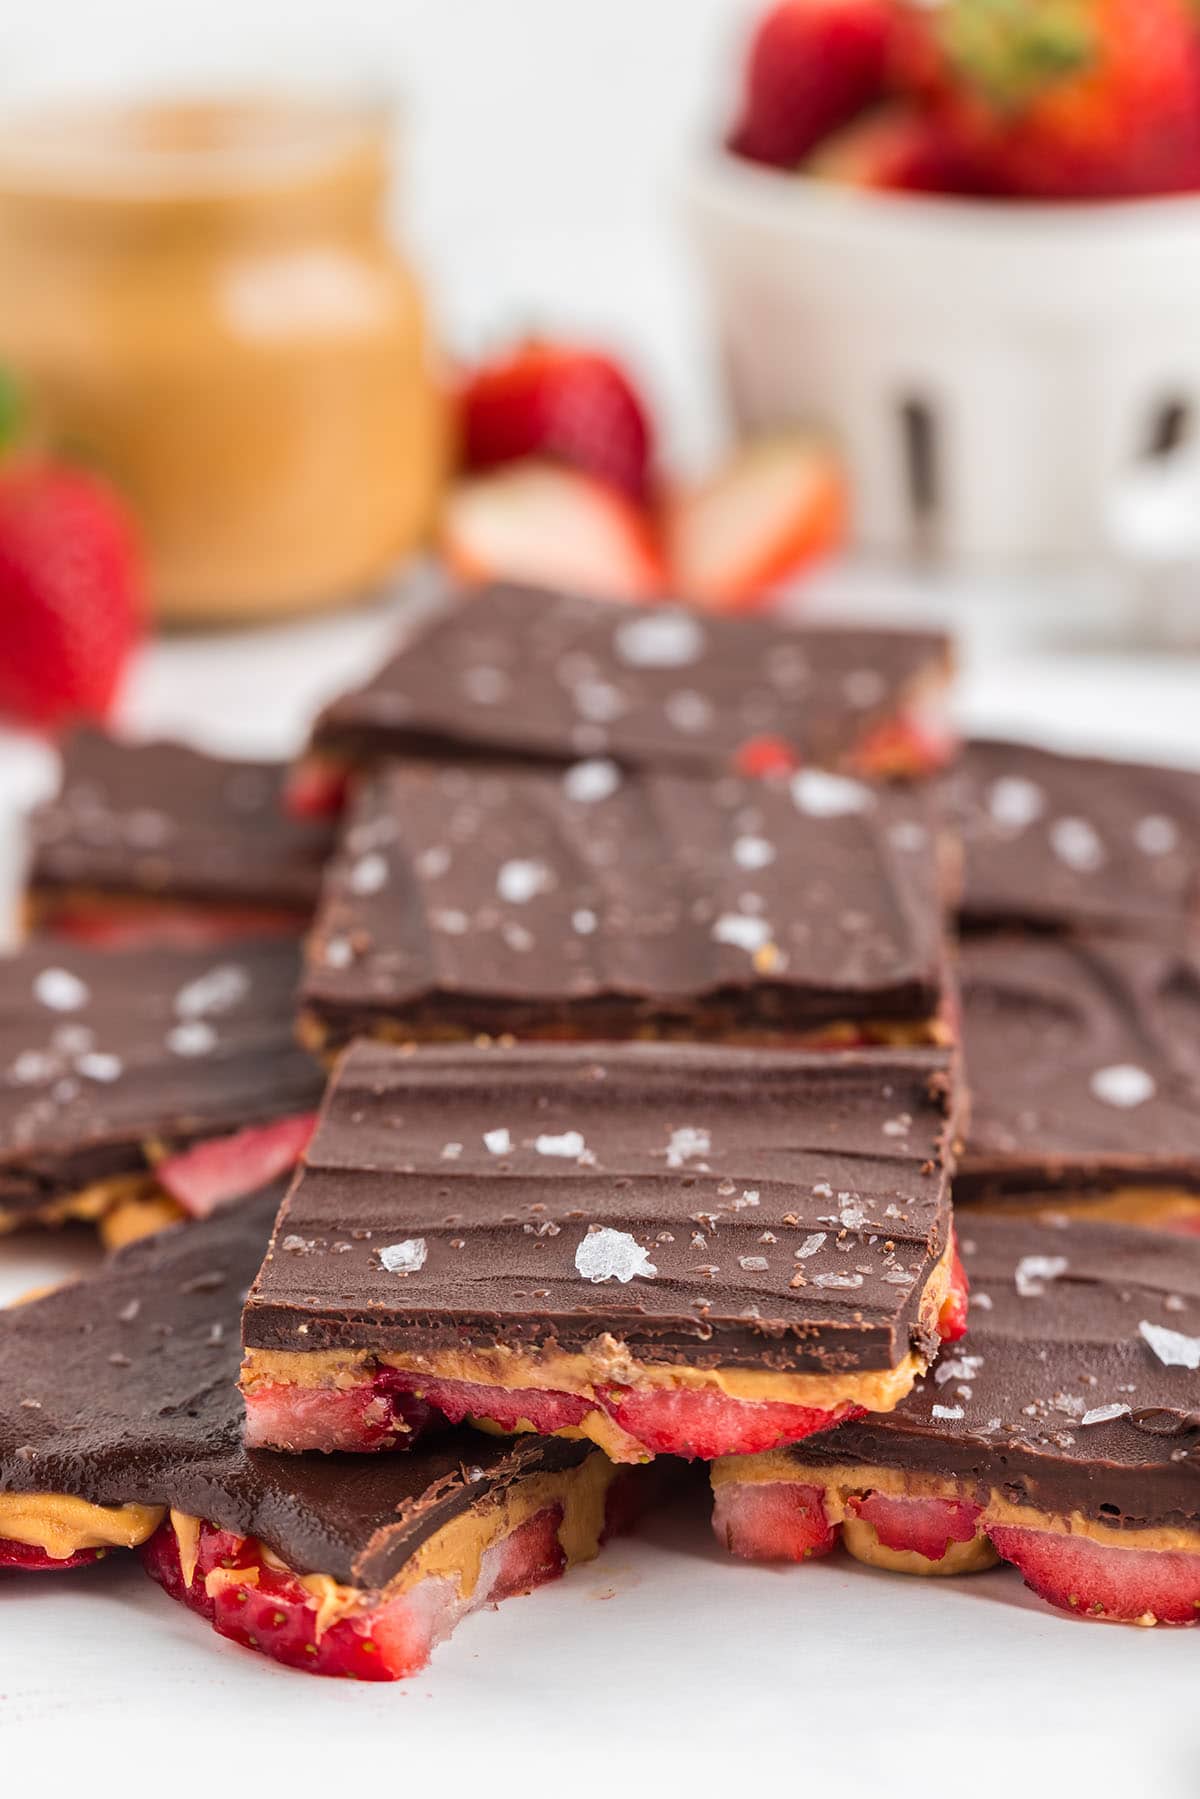 Strawberry Peanut Butter Bark scattered on the table.